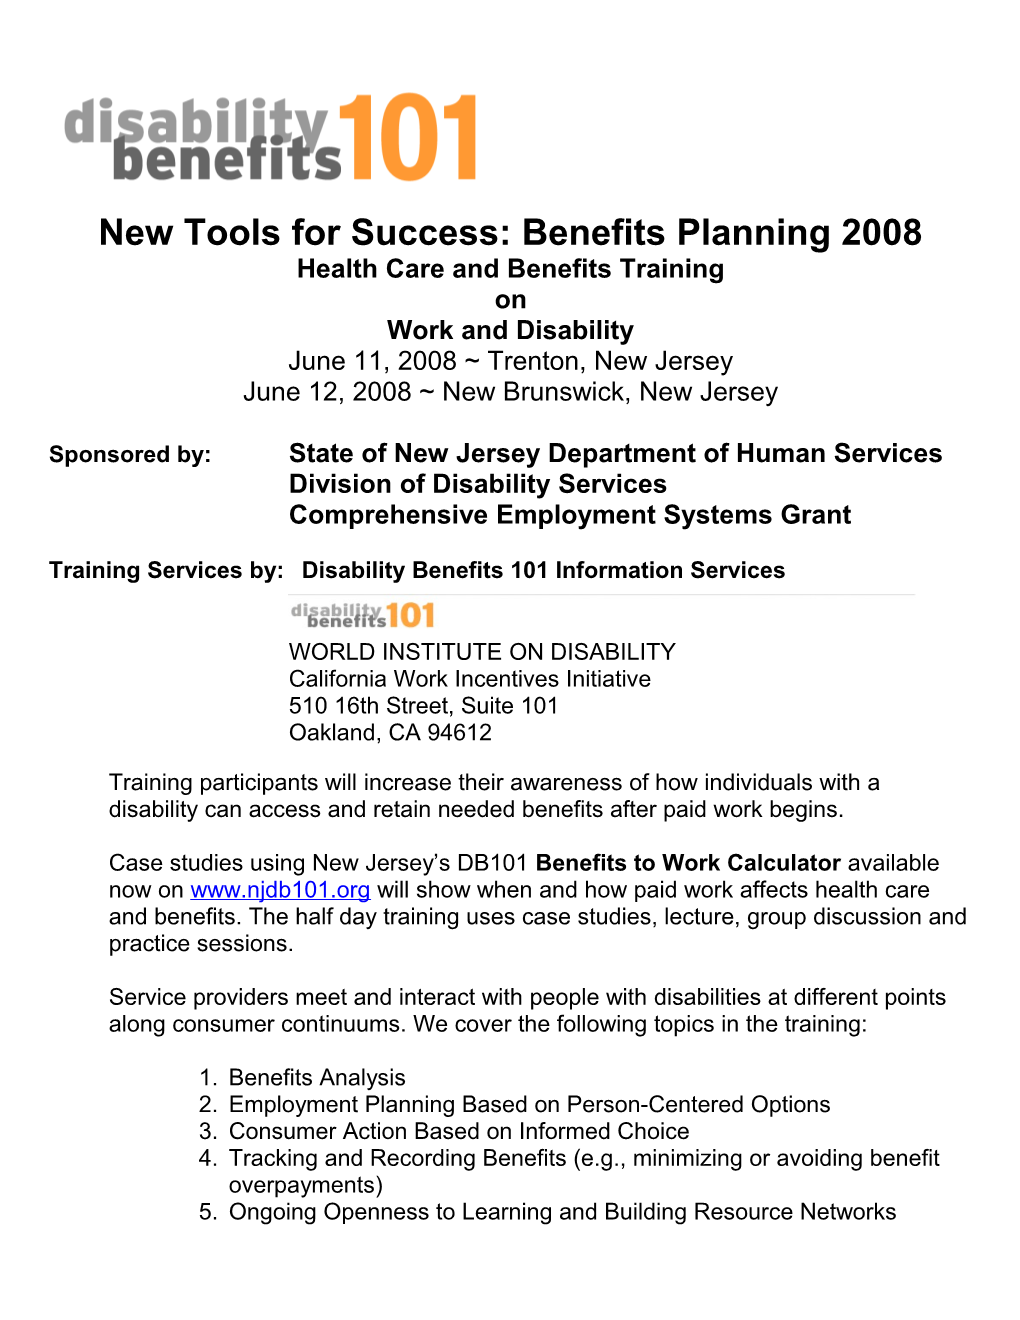 New Tools for Success: Benefits Planning 2008